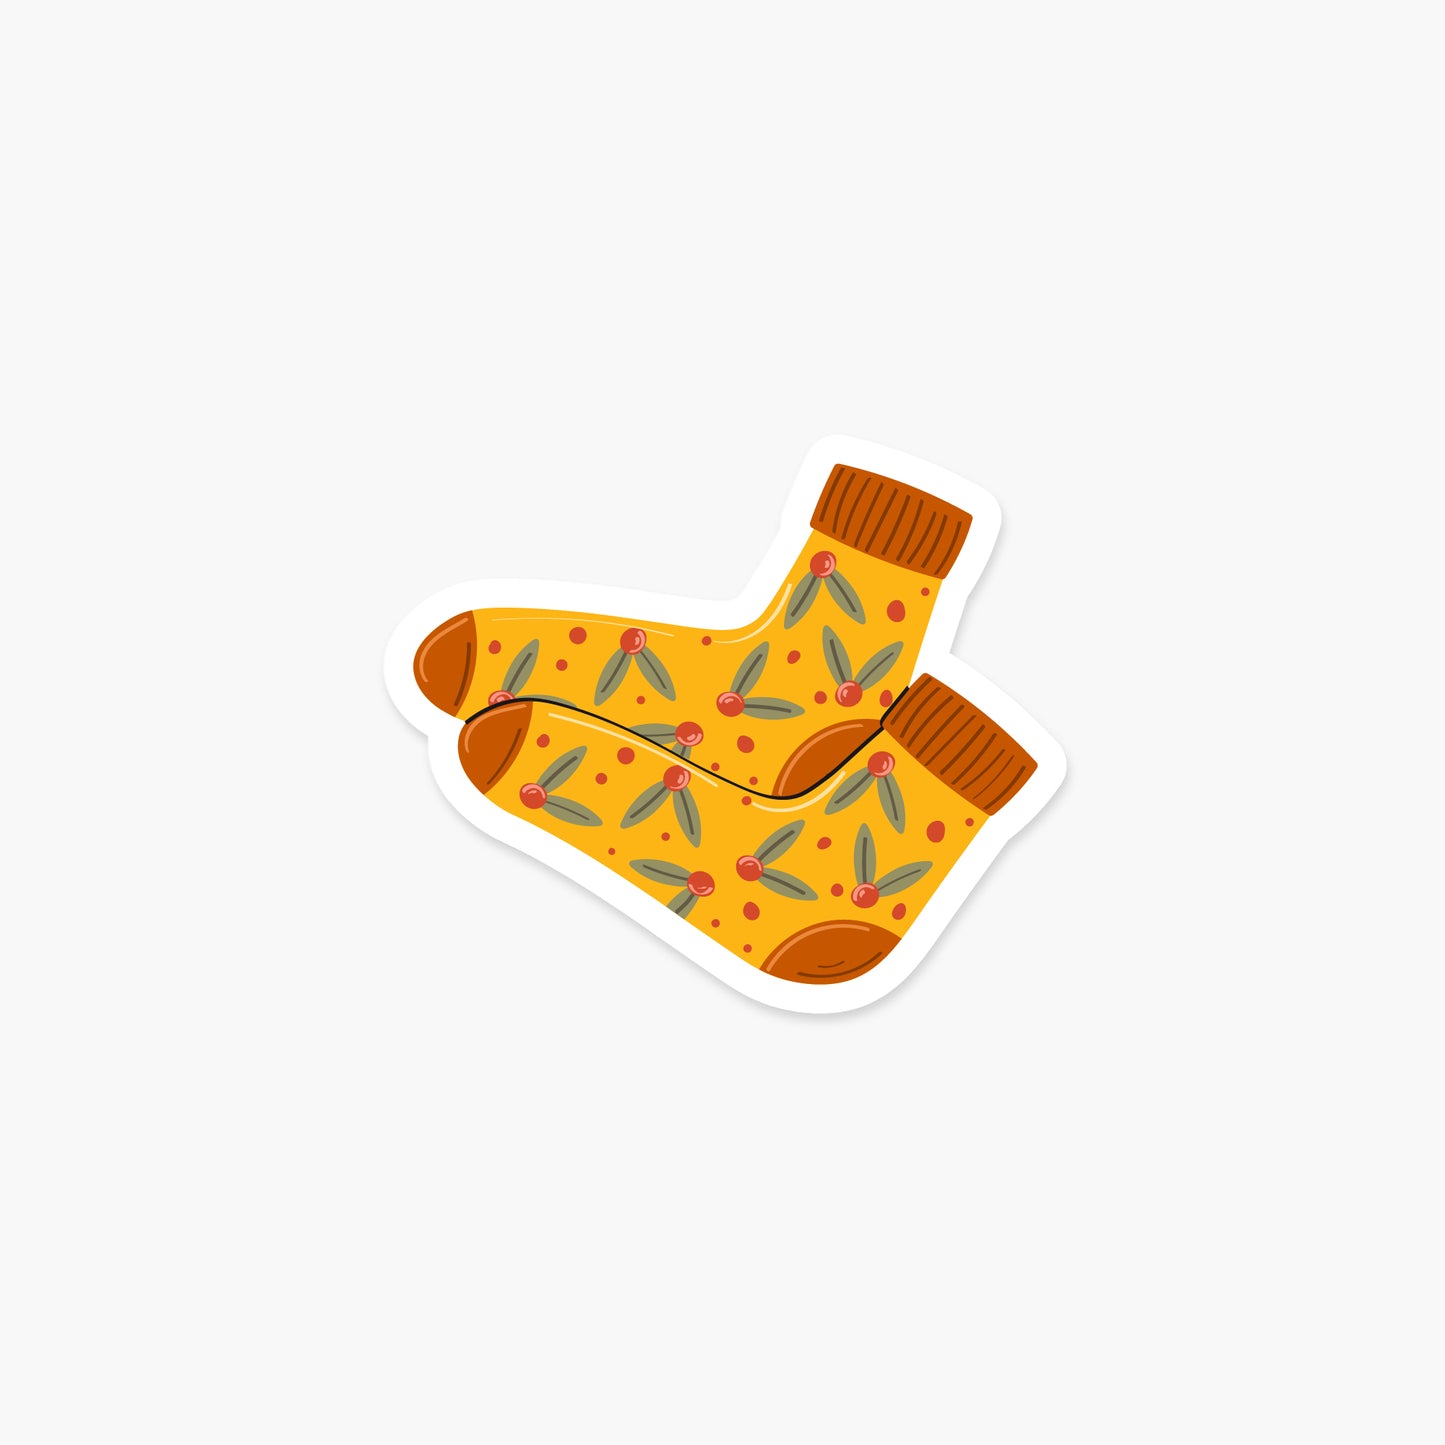 Pair of Fall Themed Socks - Food Sticker | Footnotes Paper